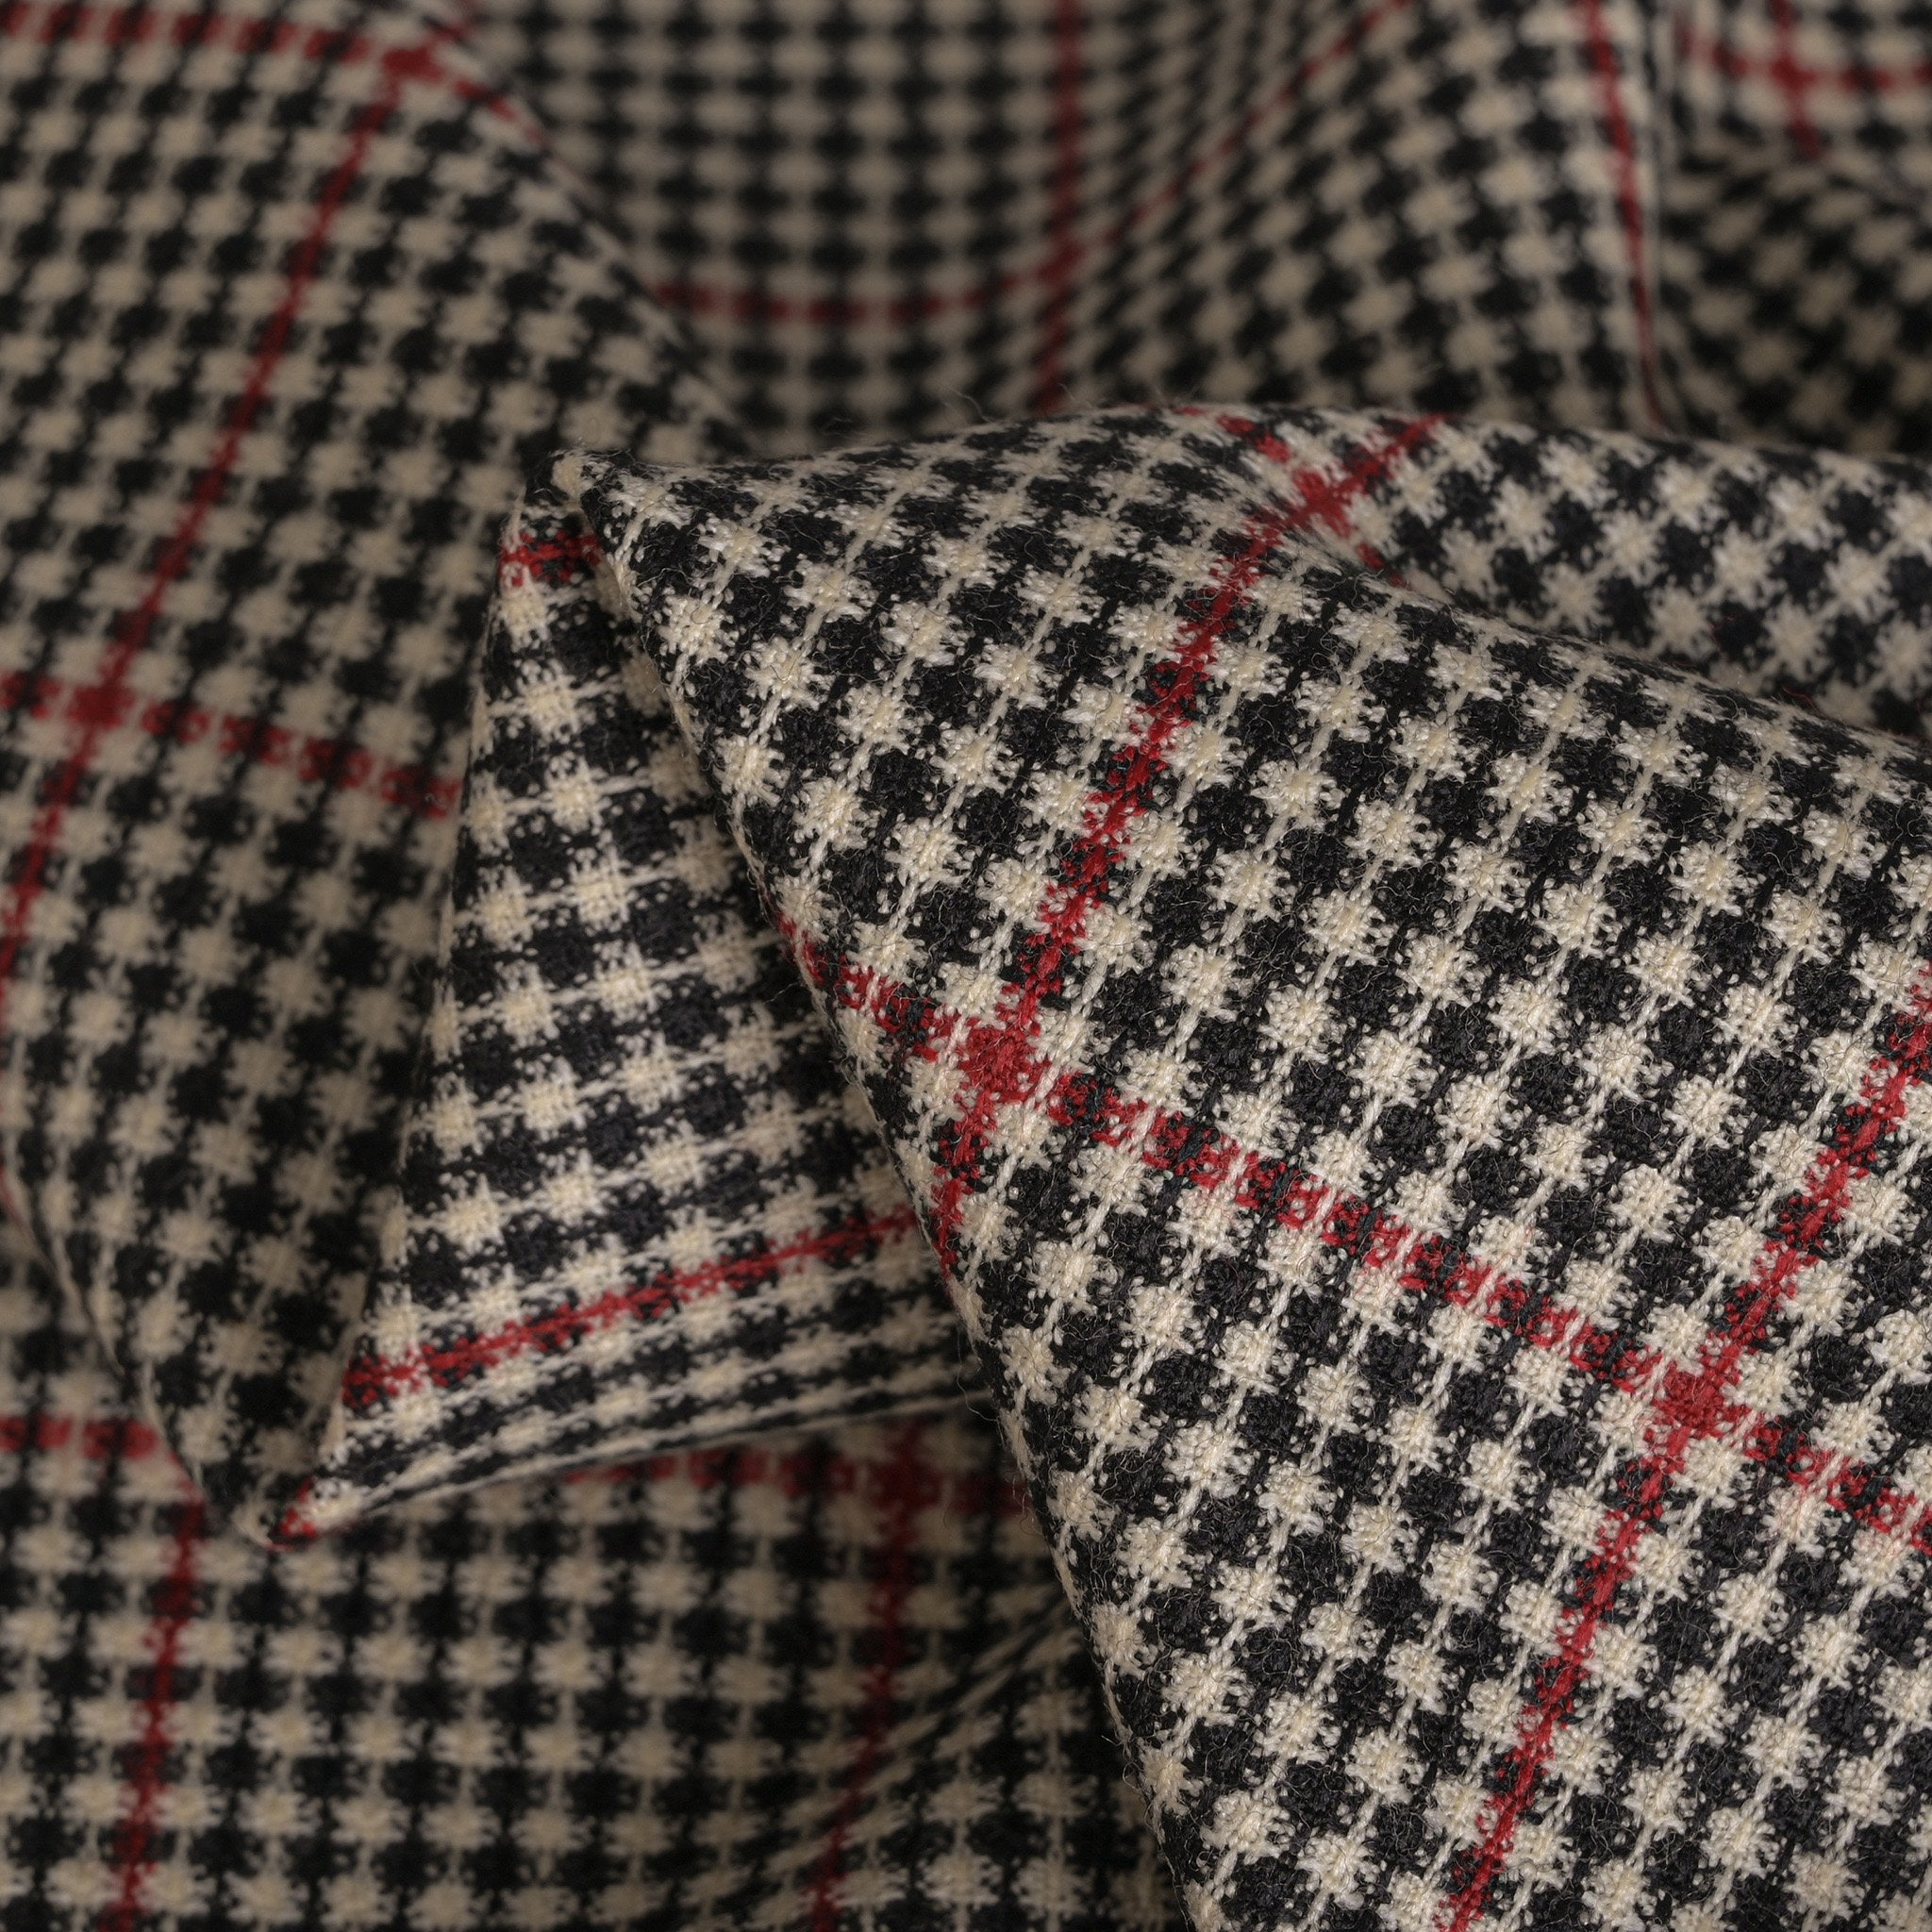 Multicolor Houndstooth Check Fabric 3920